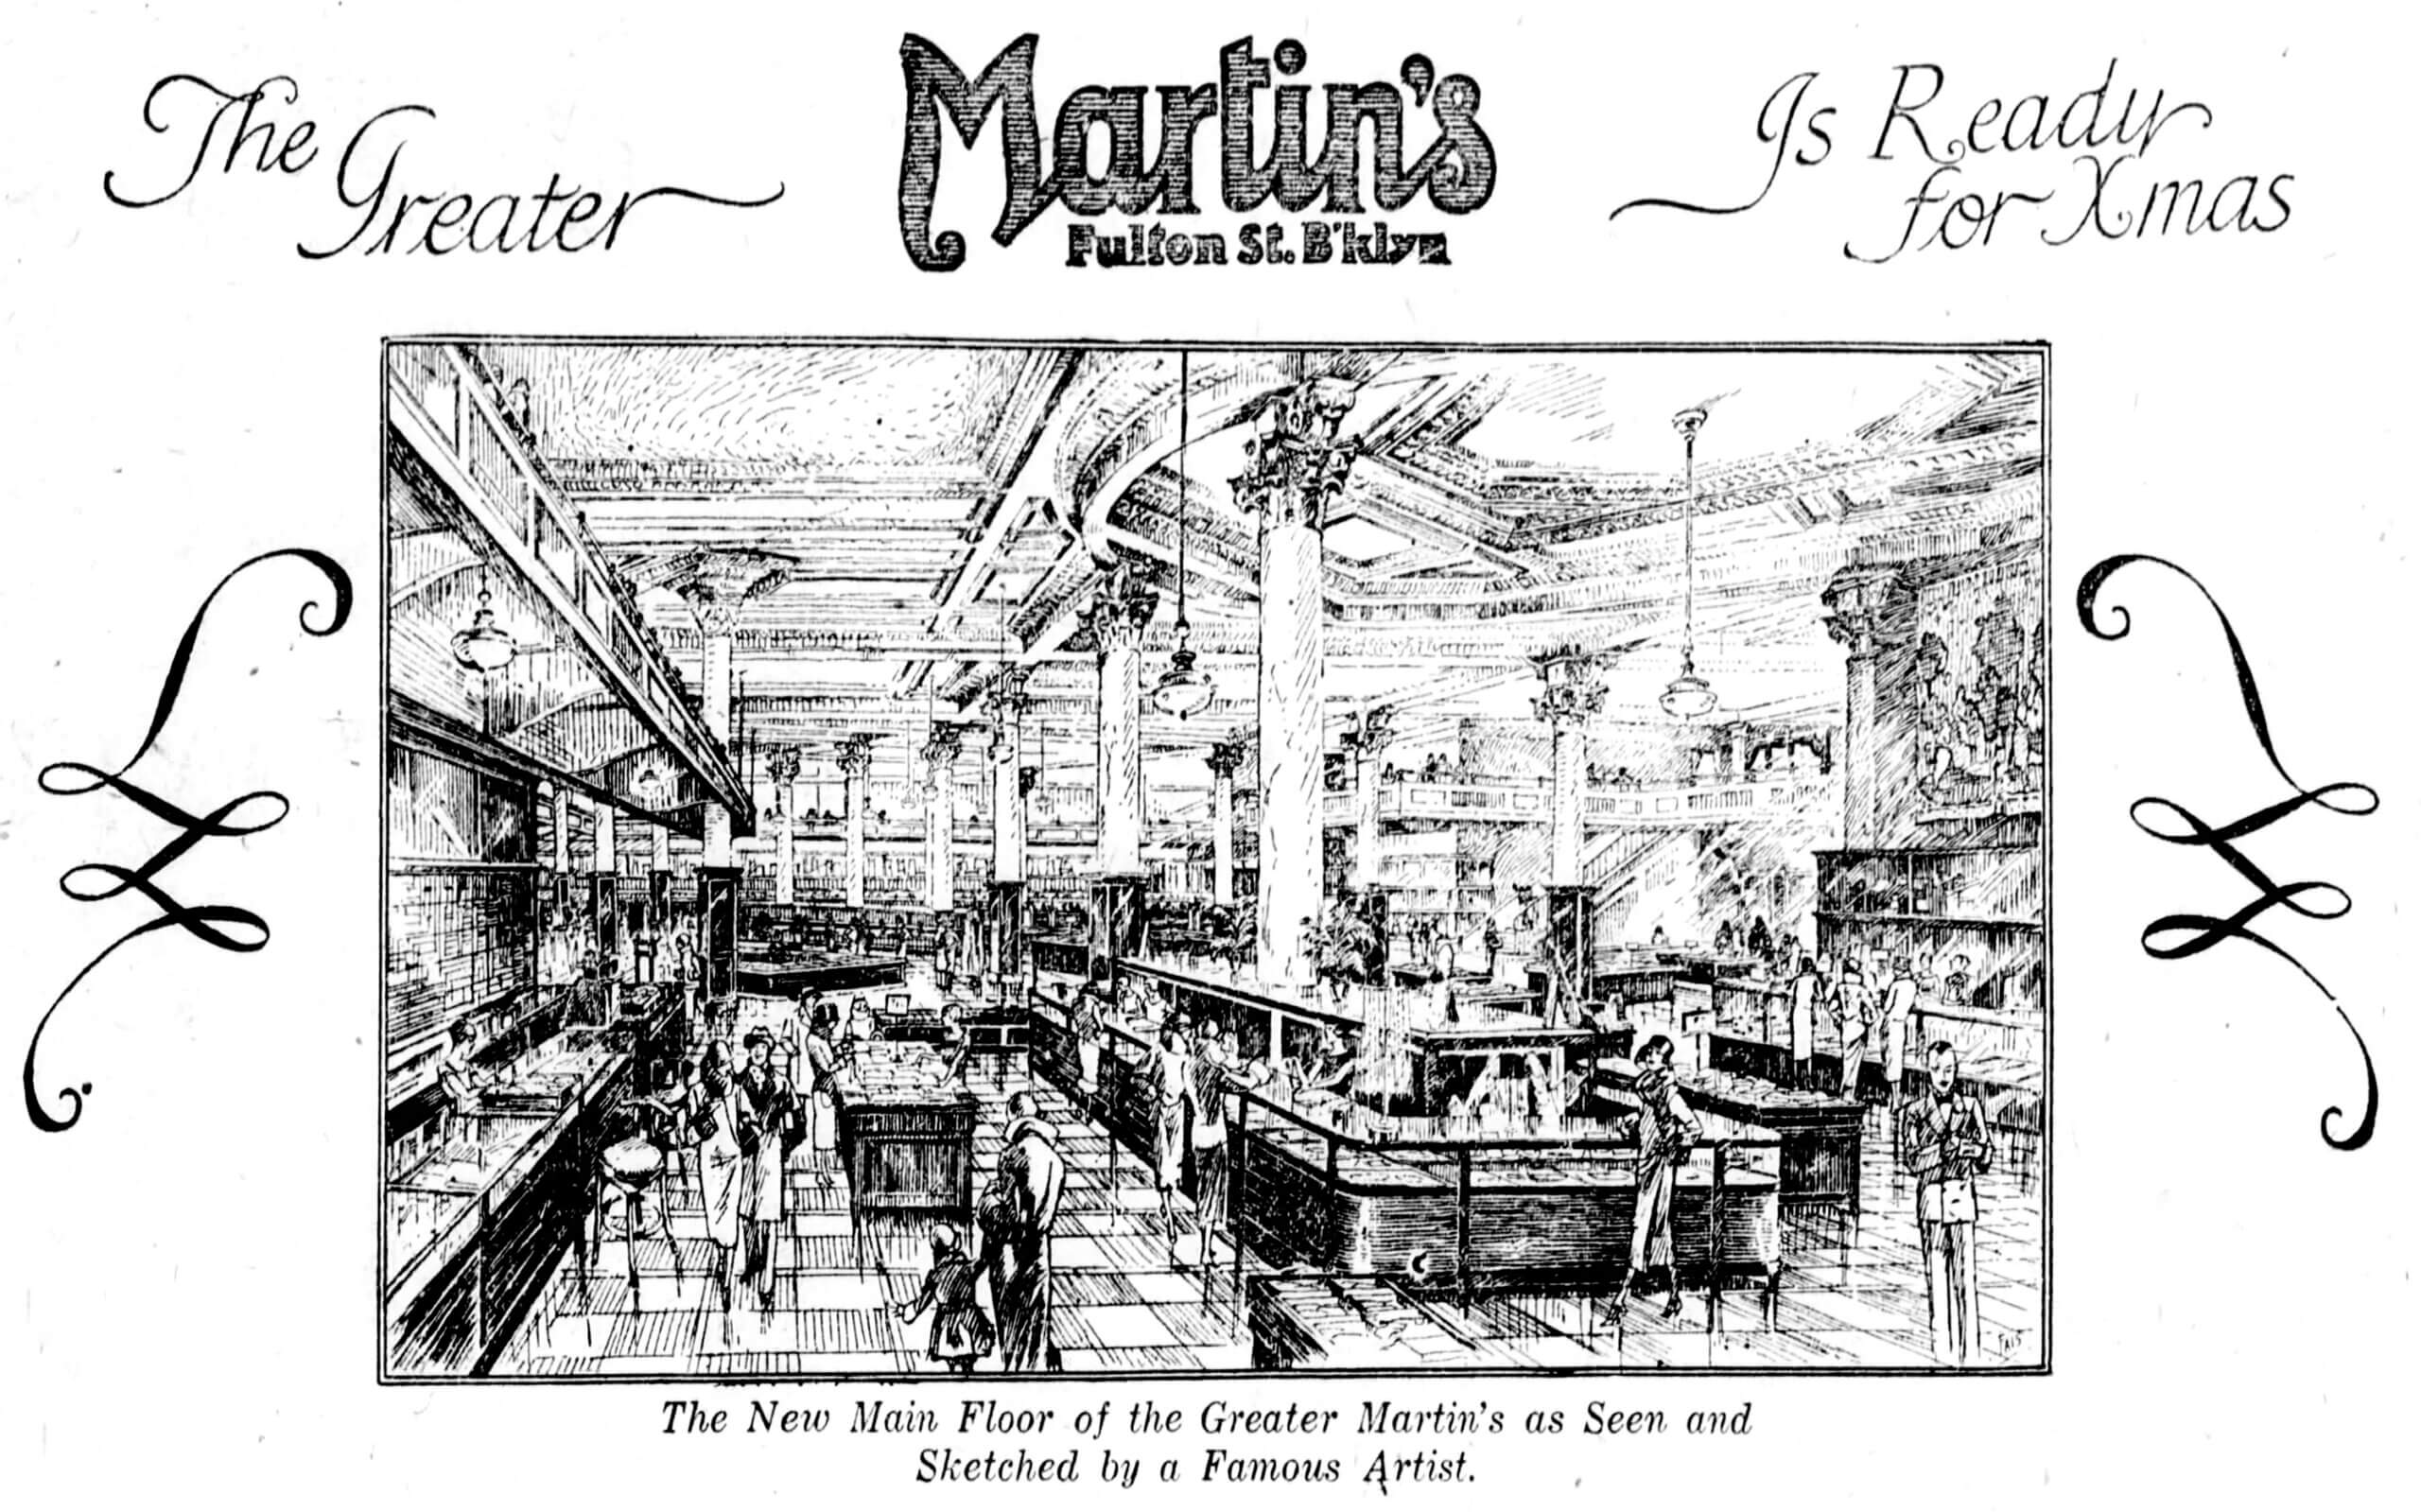 a black and white sketch of the main floor of the interior showing columns and display cases